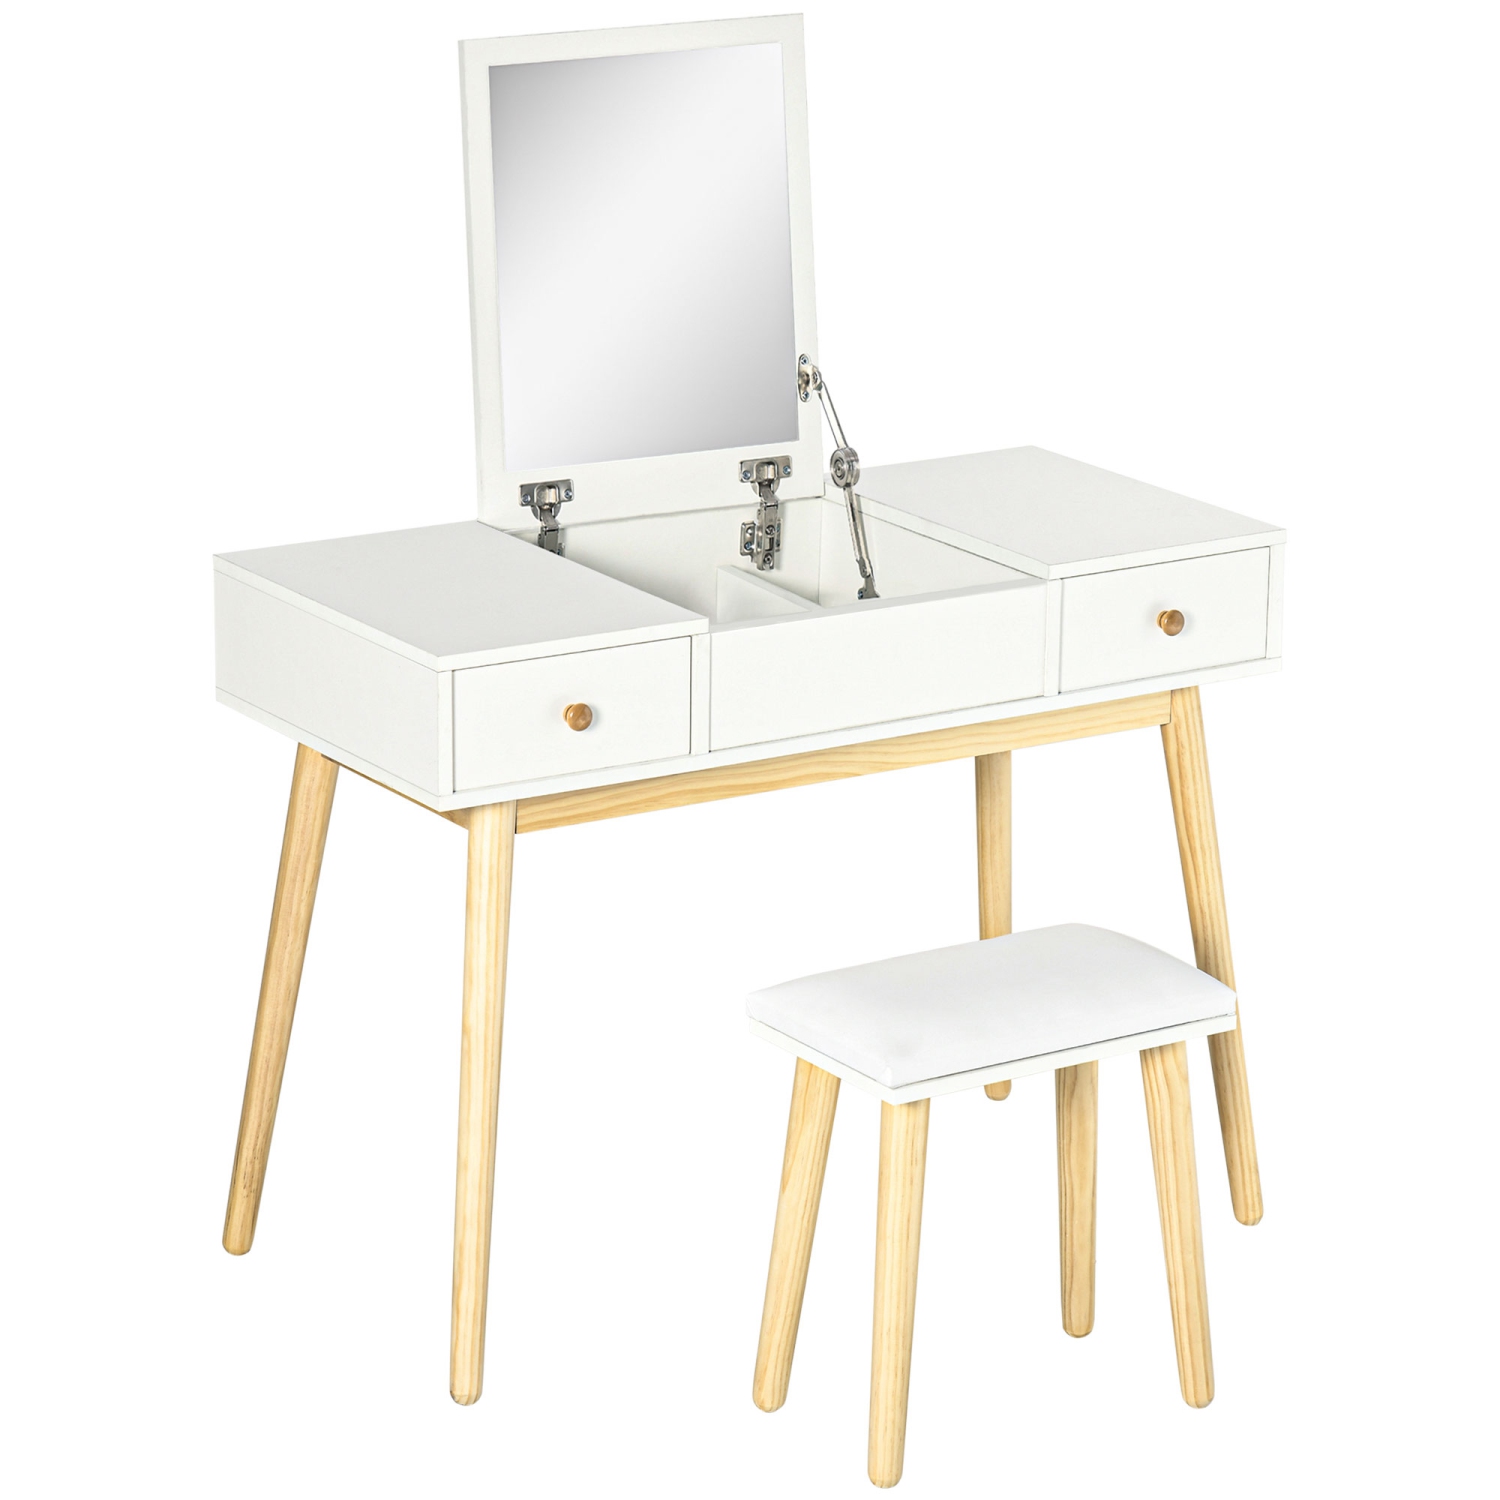 HOMCOM Dressing Table Set with Flip Top Mirror and Cushioned Stool, Makeup Vanity Dressing Table Writing Desk with 2 Drawers and Storage Grids for Bedroom, White